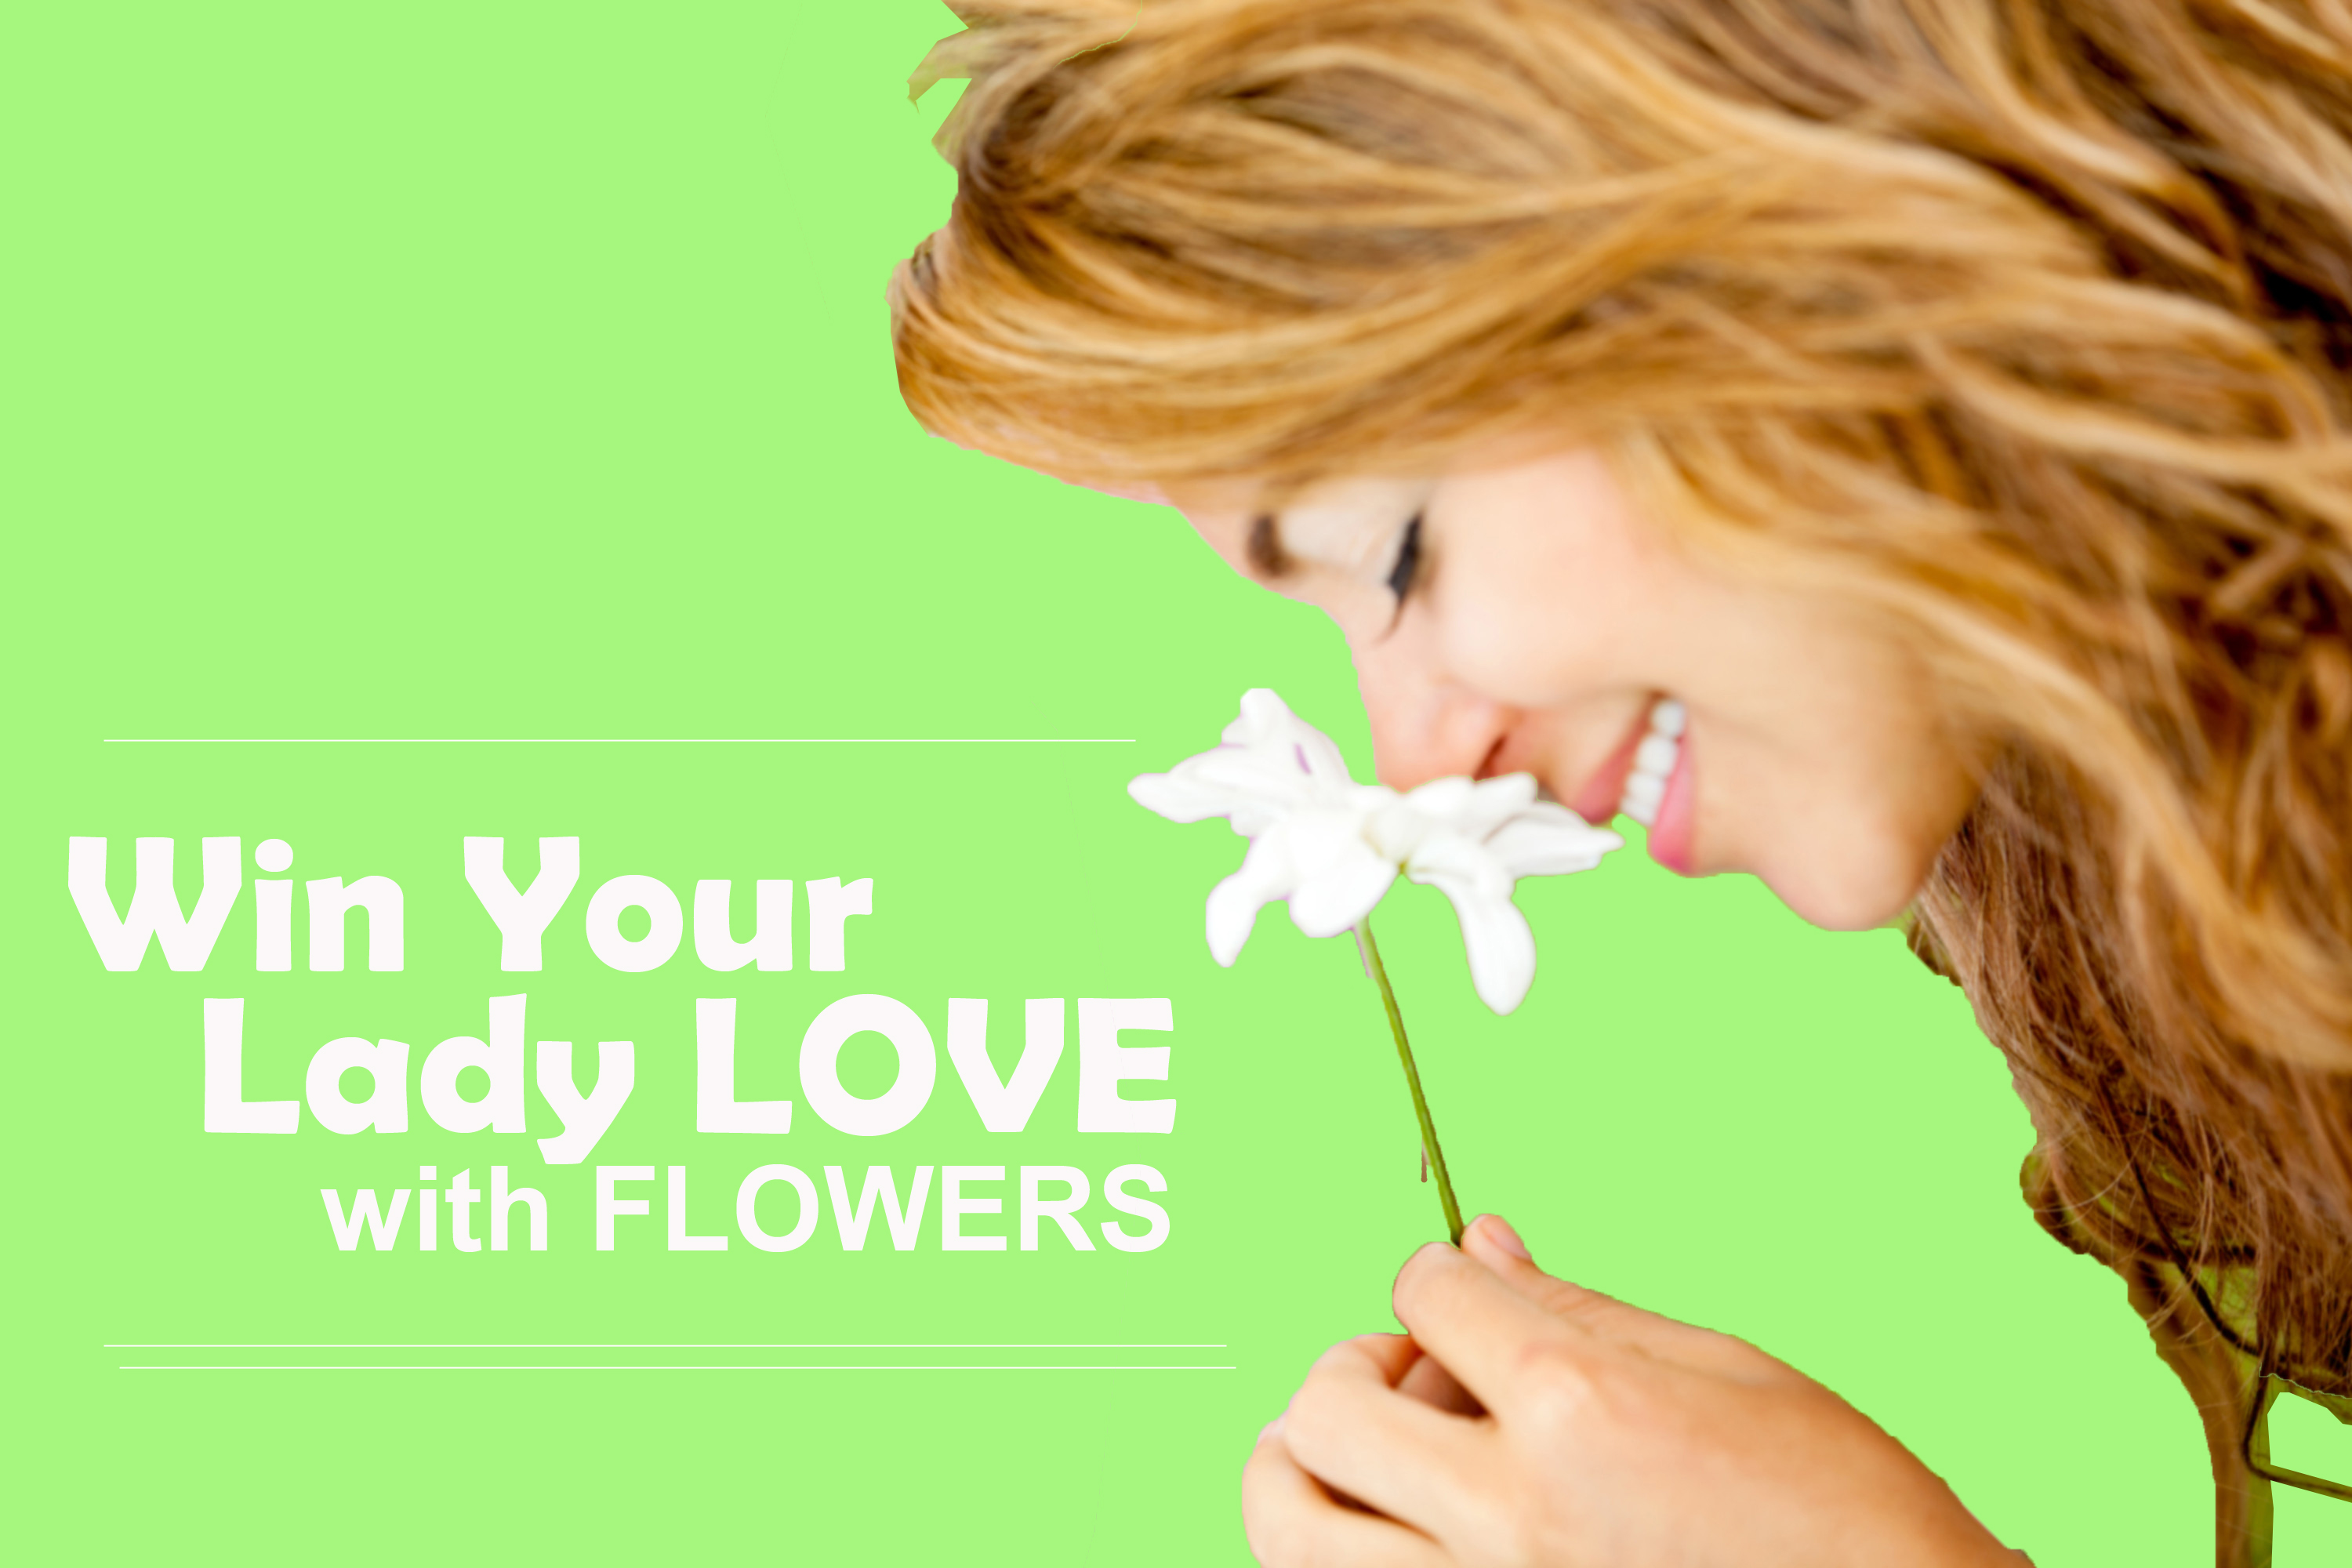 How To Win Your Lady Love With Flowers